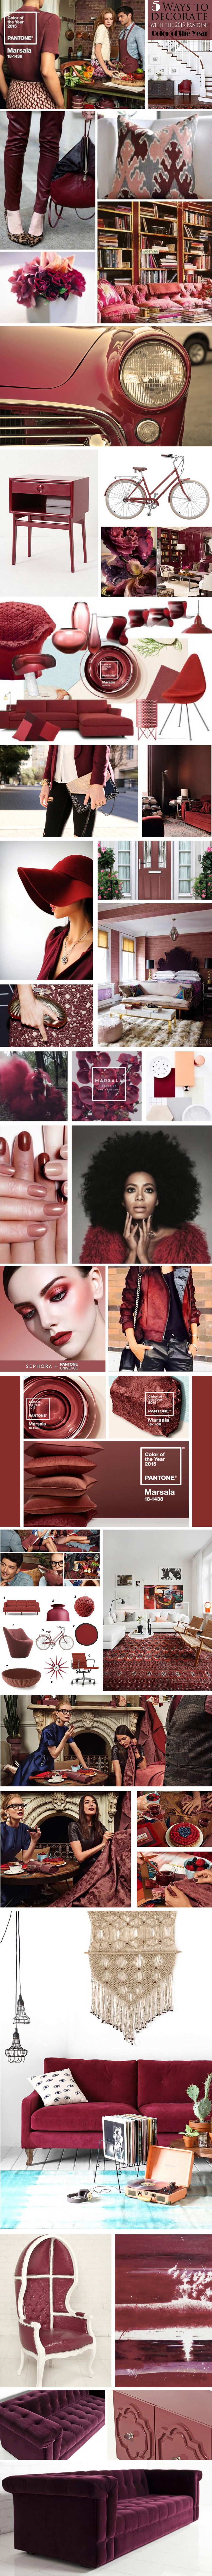 Pantone Color of the Year 2015: Marsala